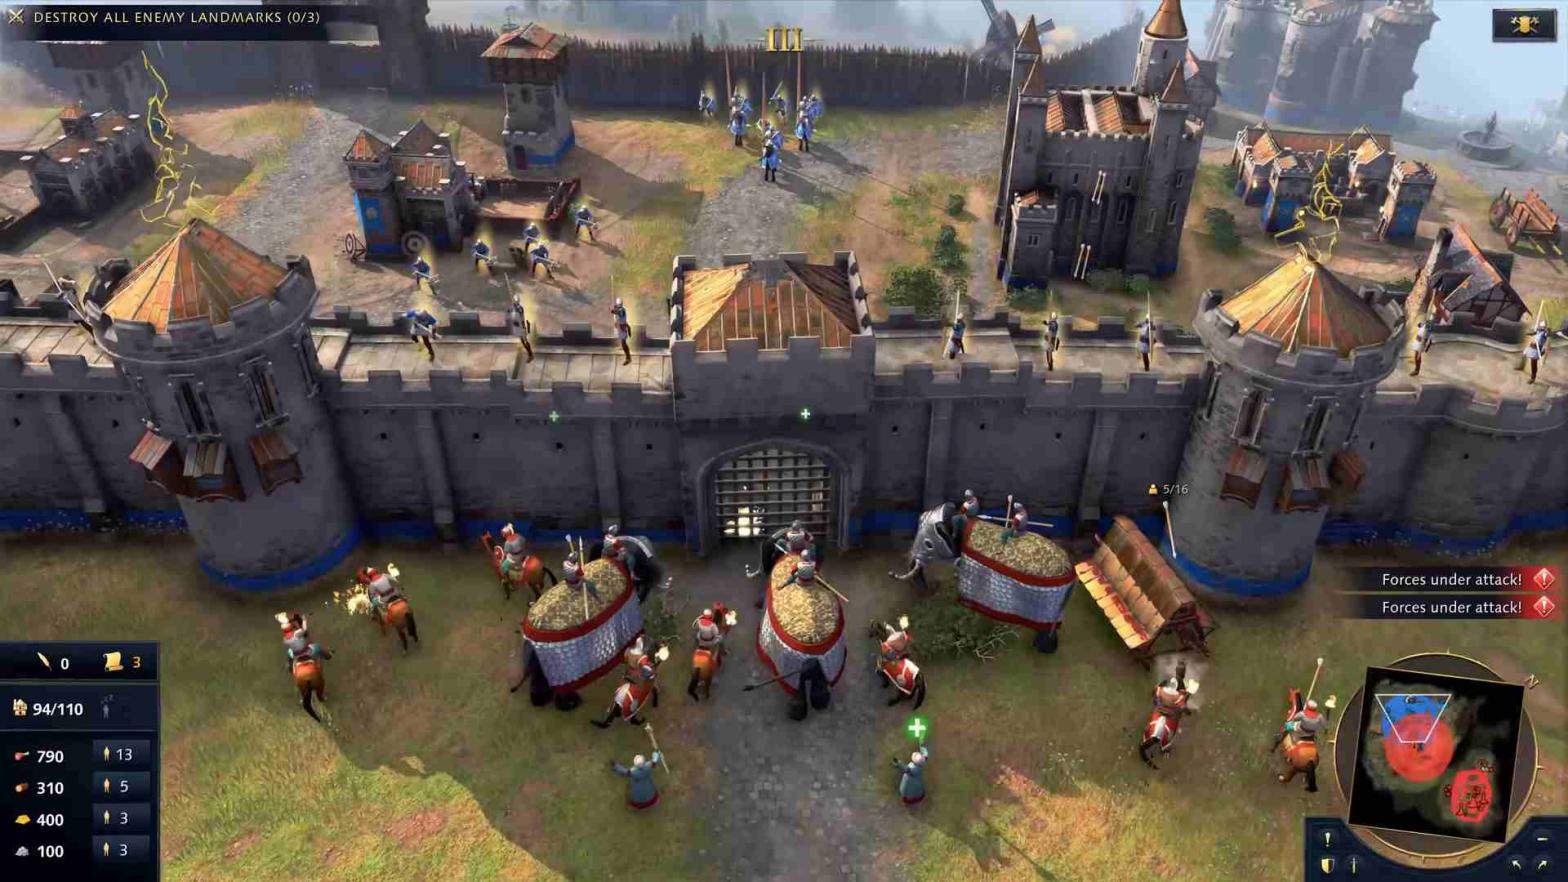 Archers on top of walls shoot at enemy elephants and rams below